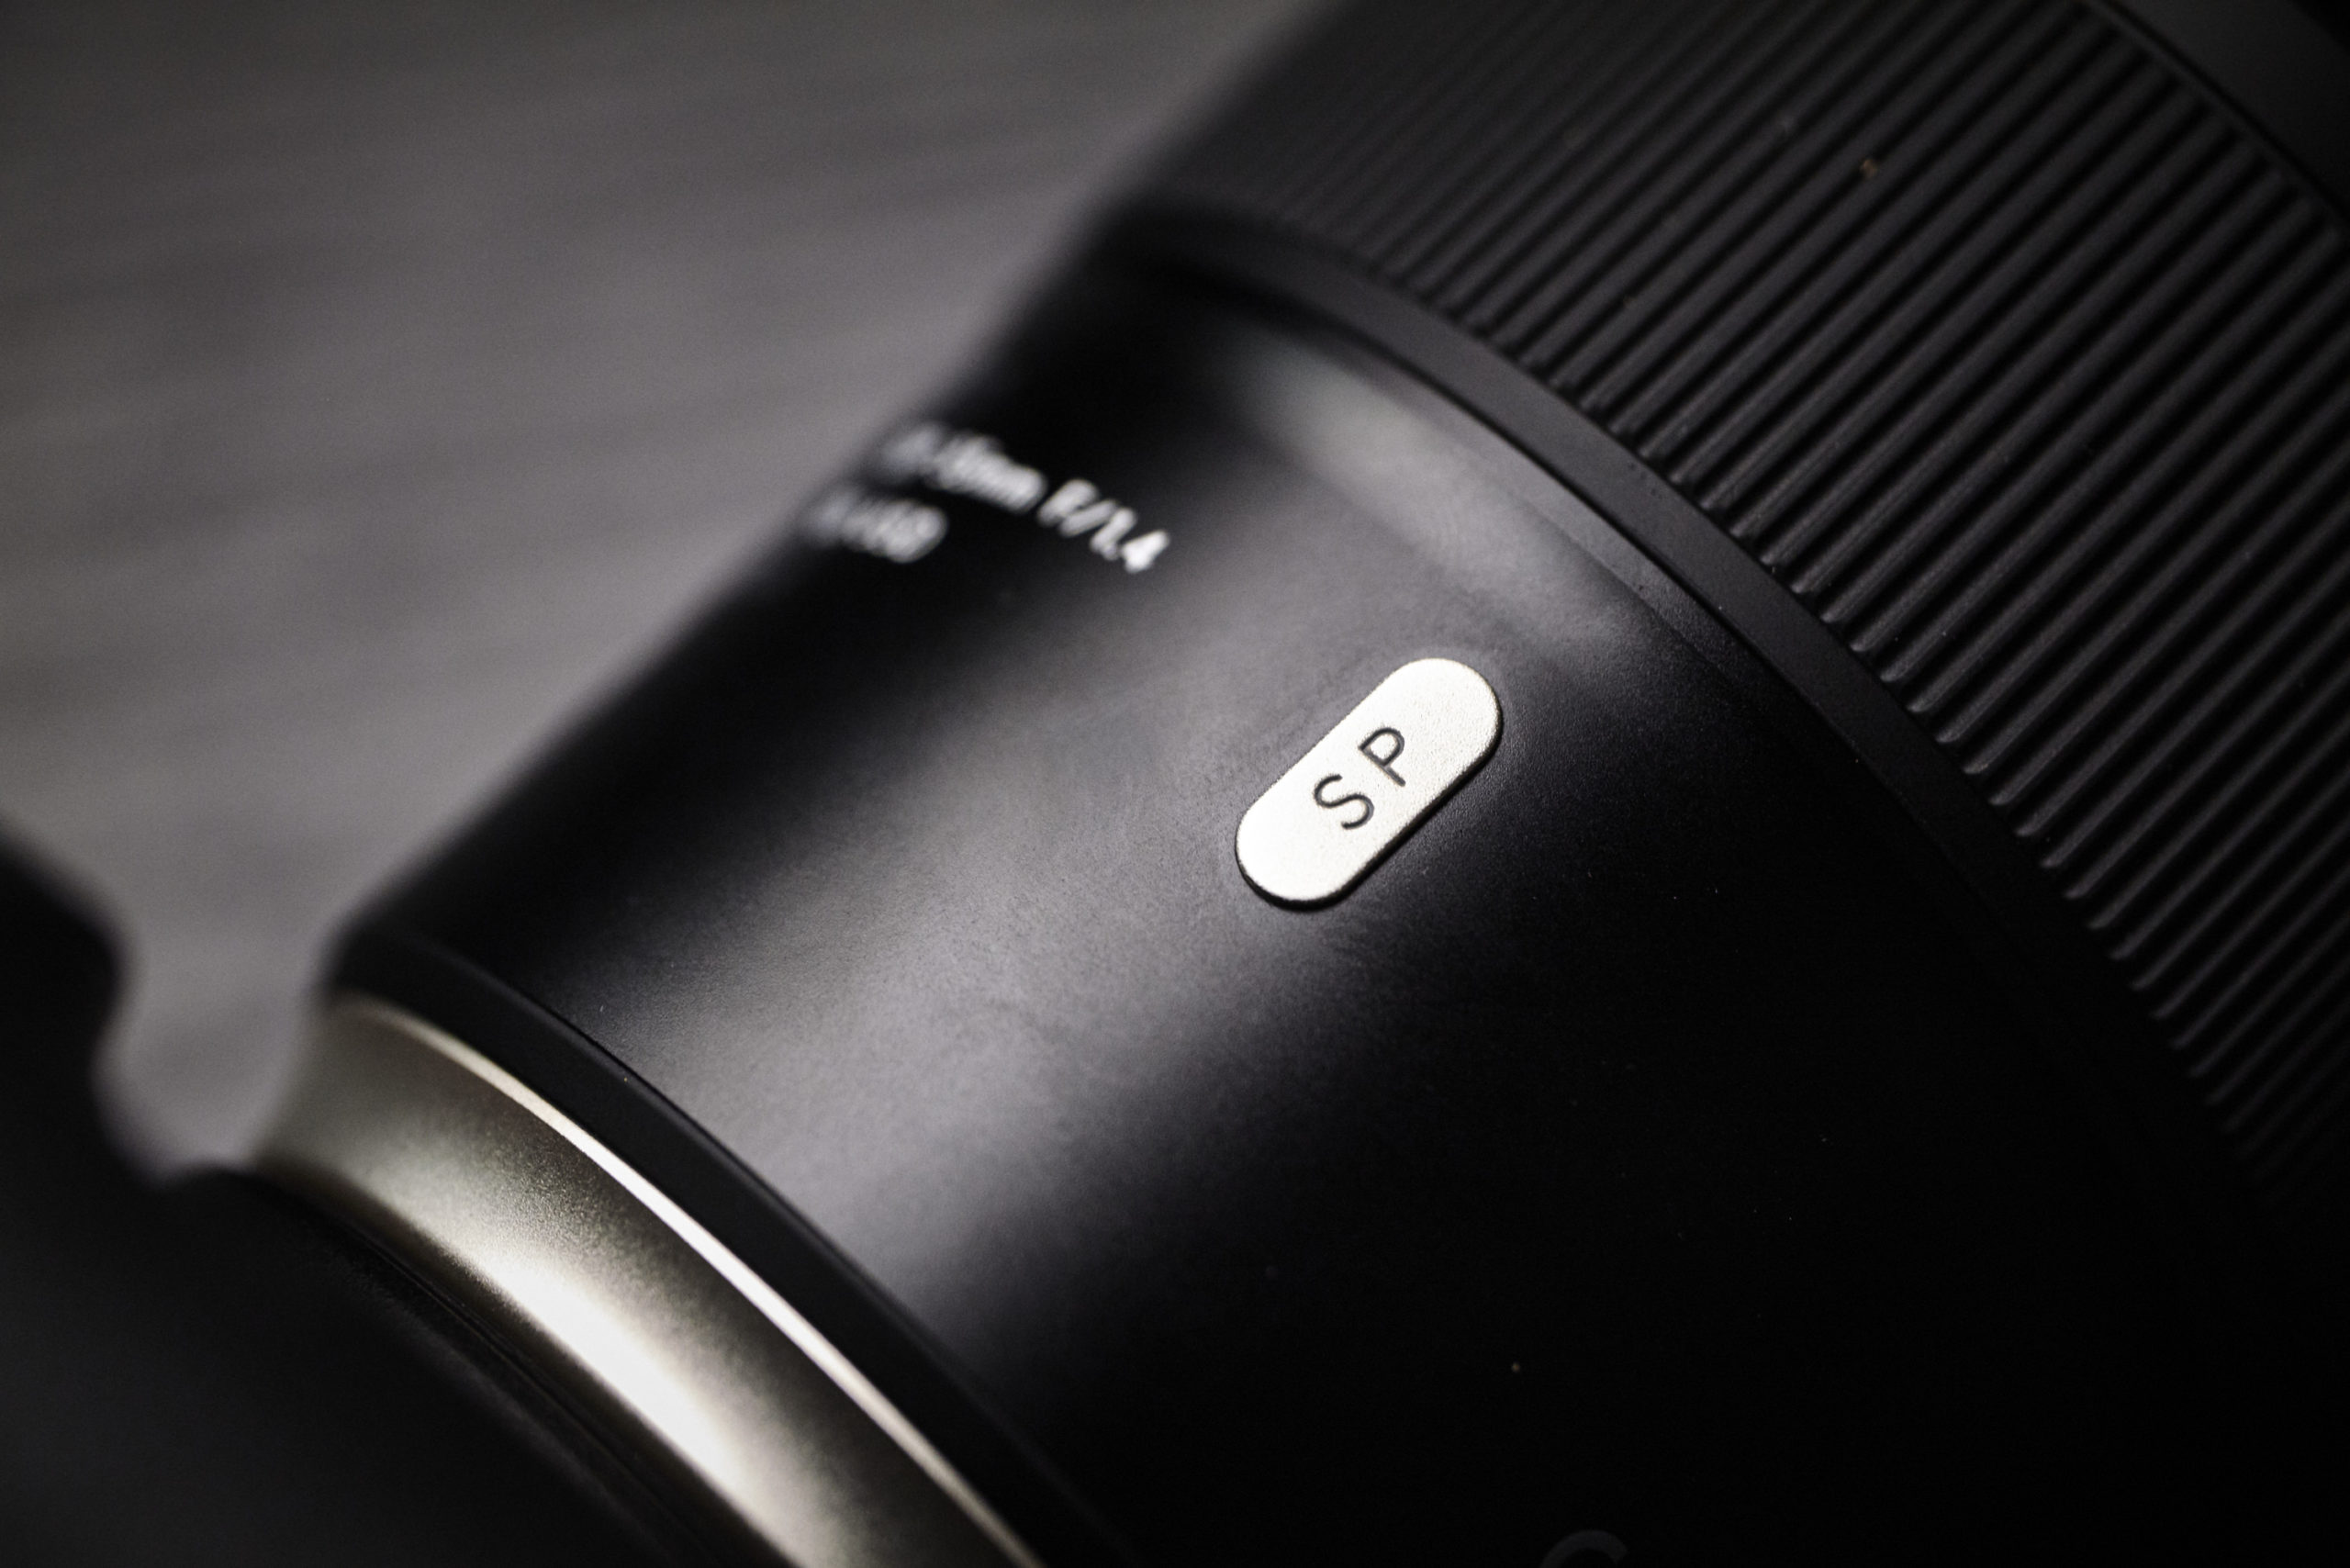 Chris Gampat The Phoblographer Tamron 35mm f1.4 Di USD product images review 5